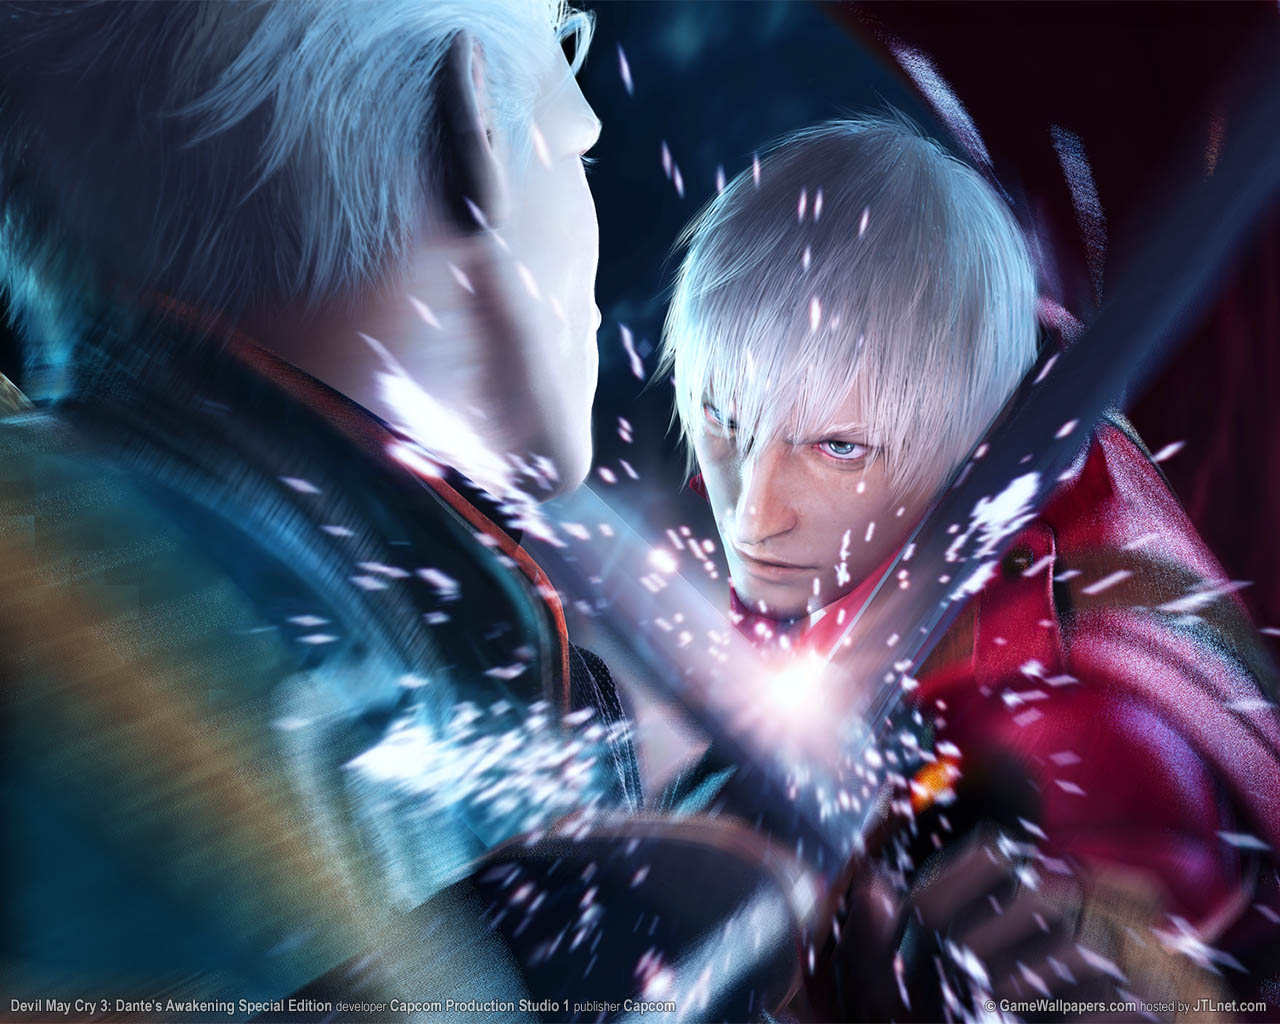 Devil May Cry 3%3A Dante%5C%27s Awakening Special Edition fond d'cran 01 1280x1024